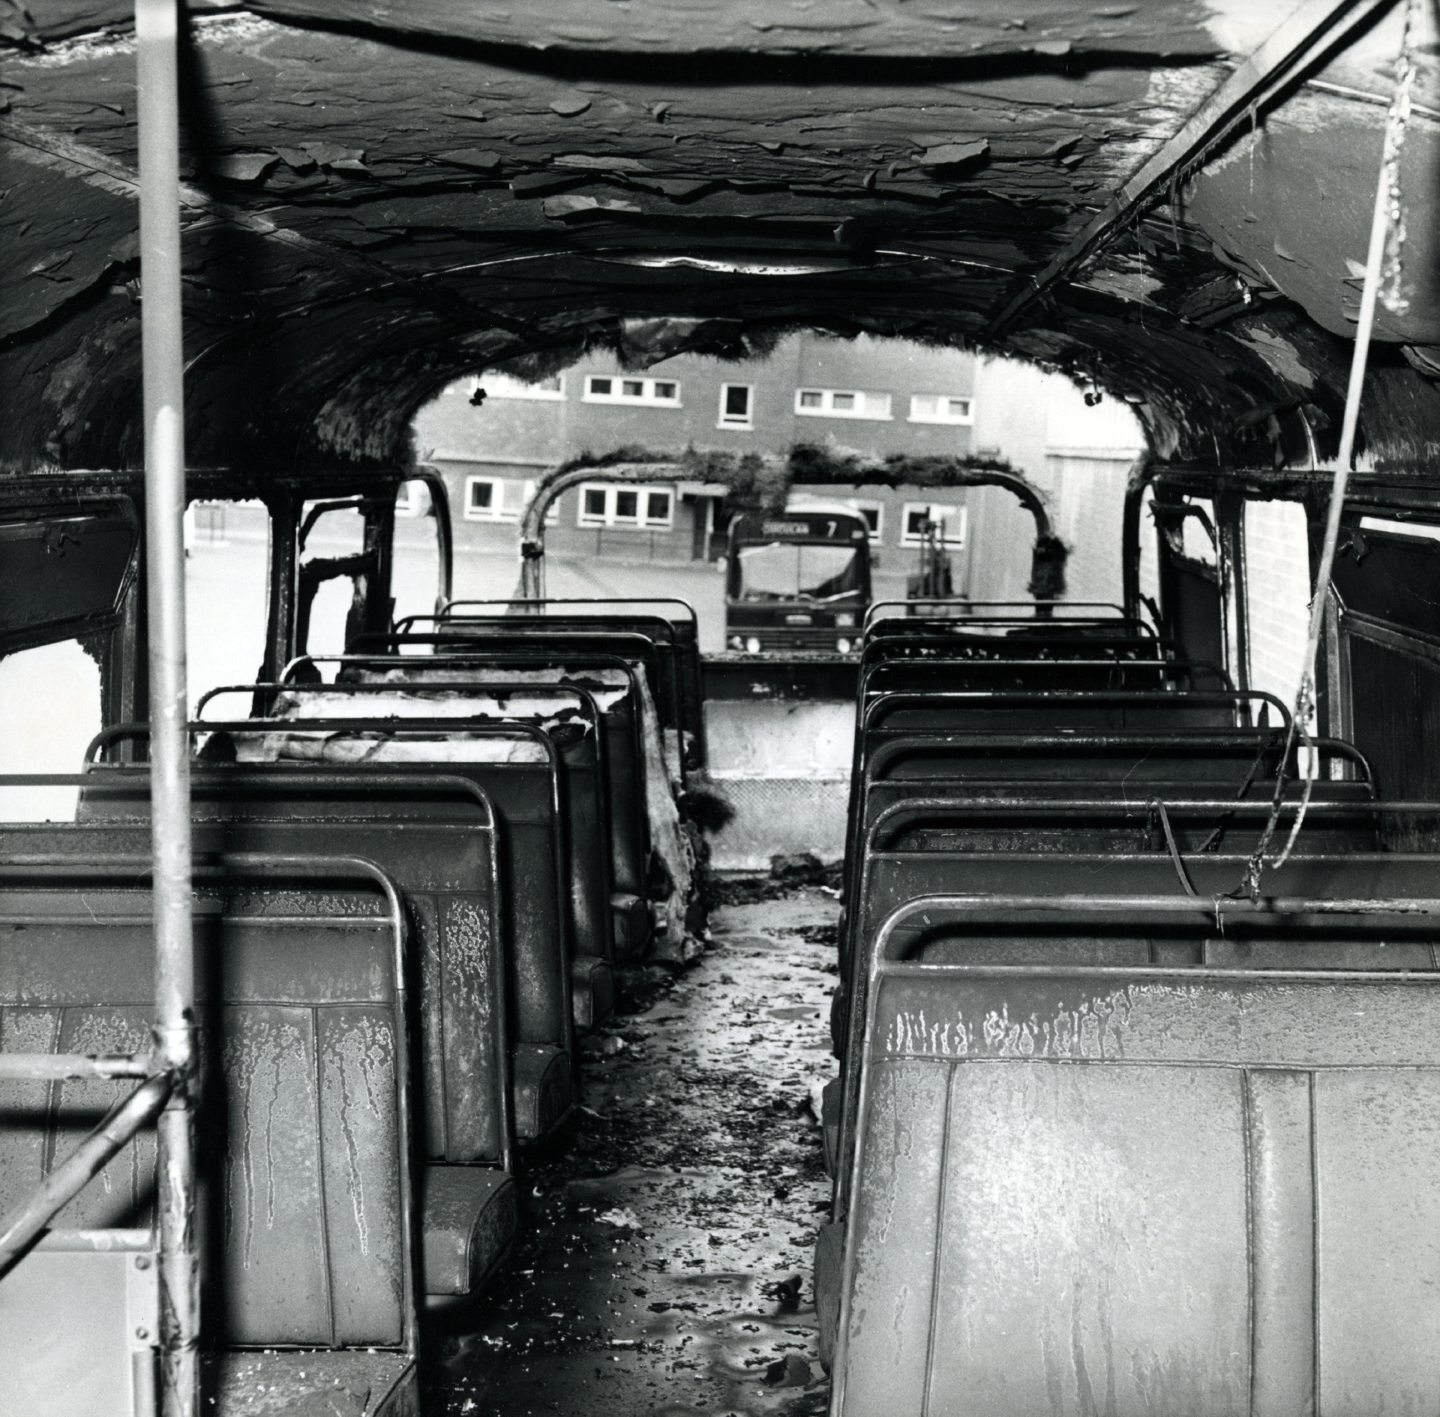 The charred remains of the bus which was set on fire back in July 1973.